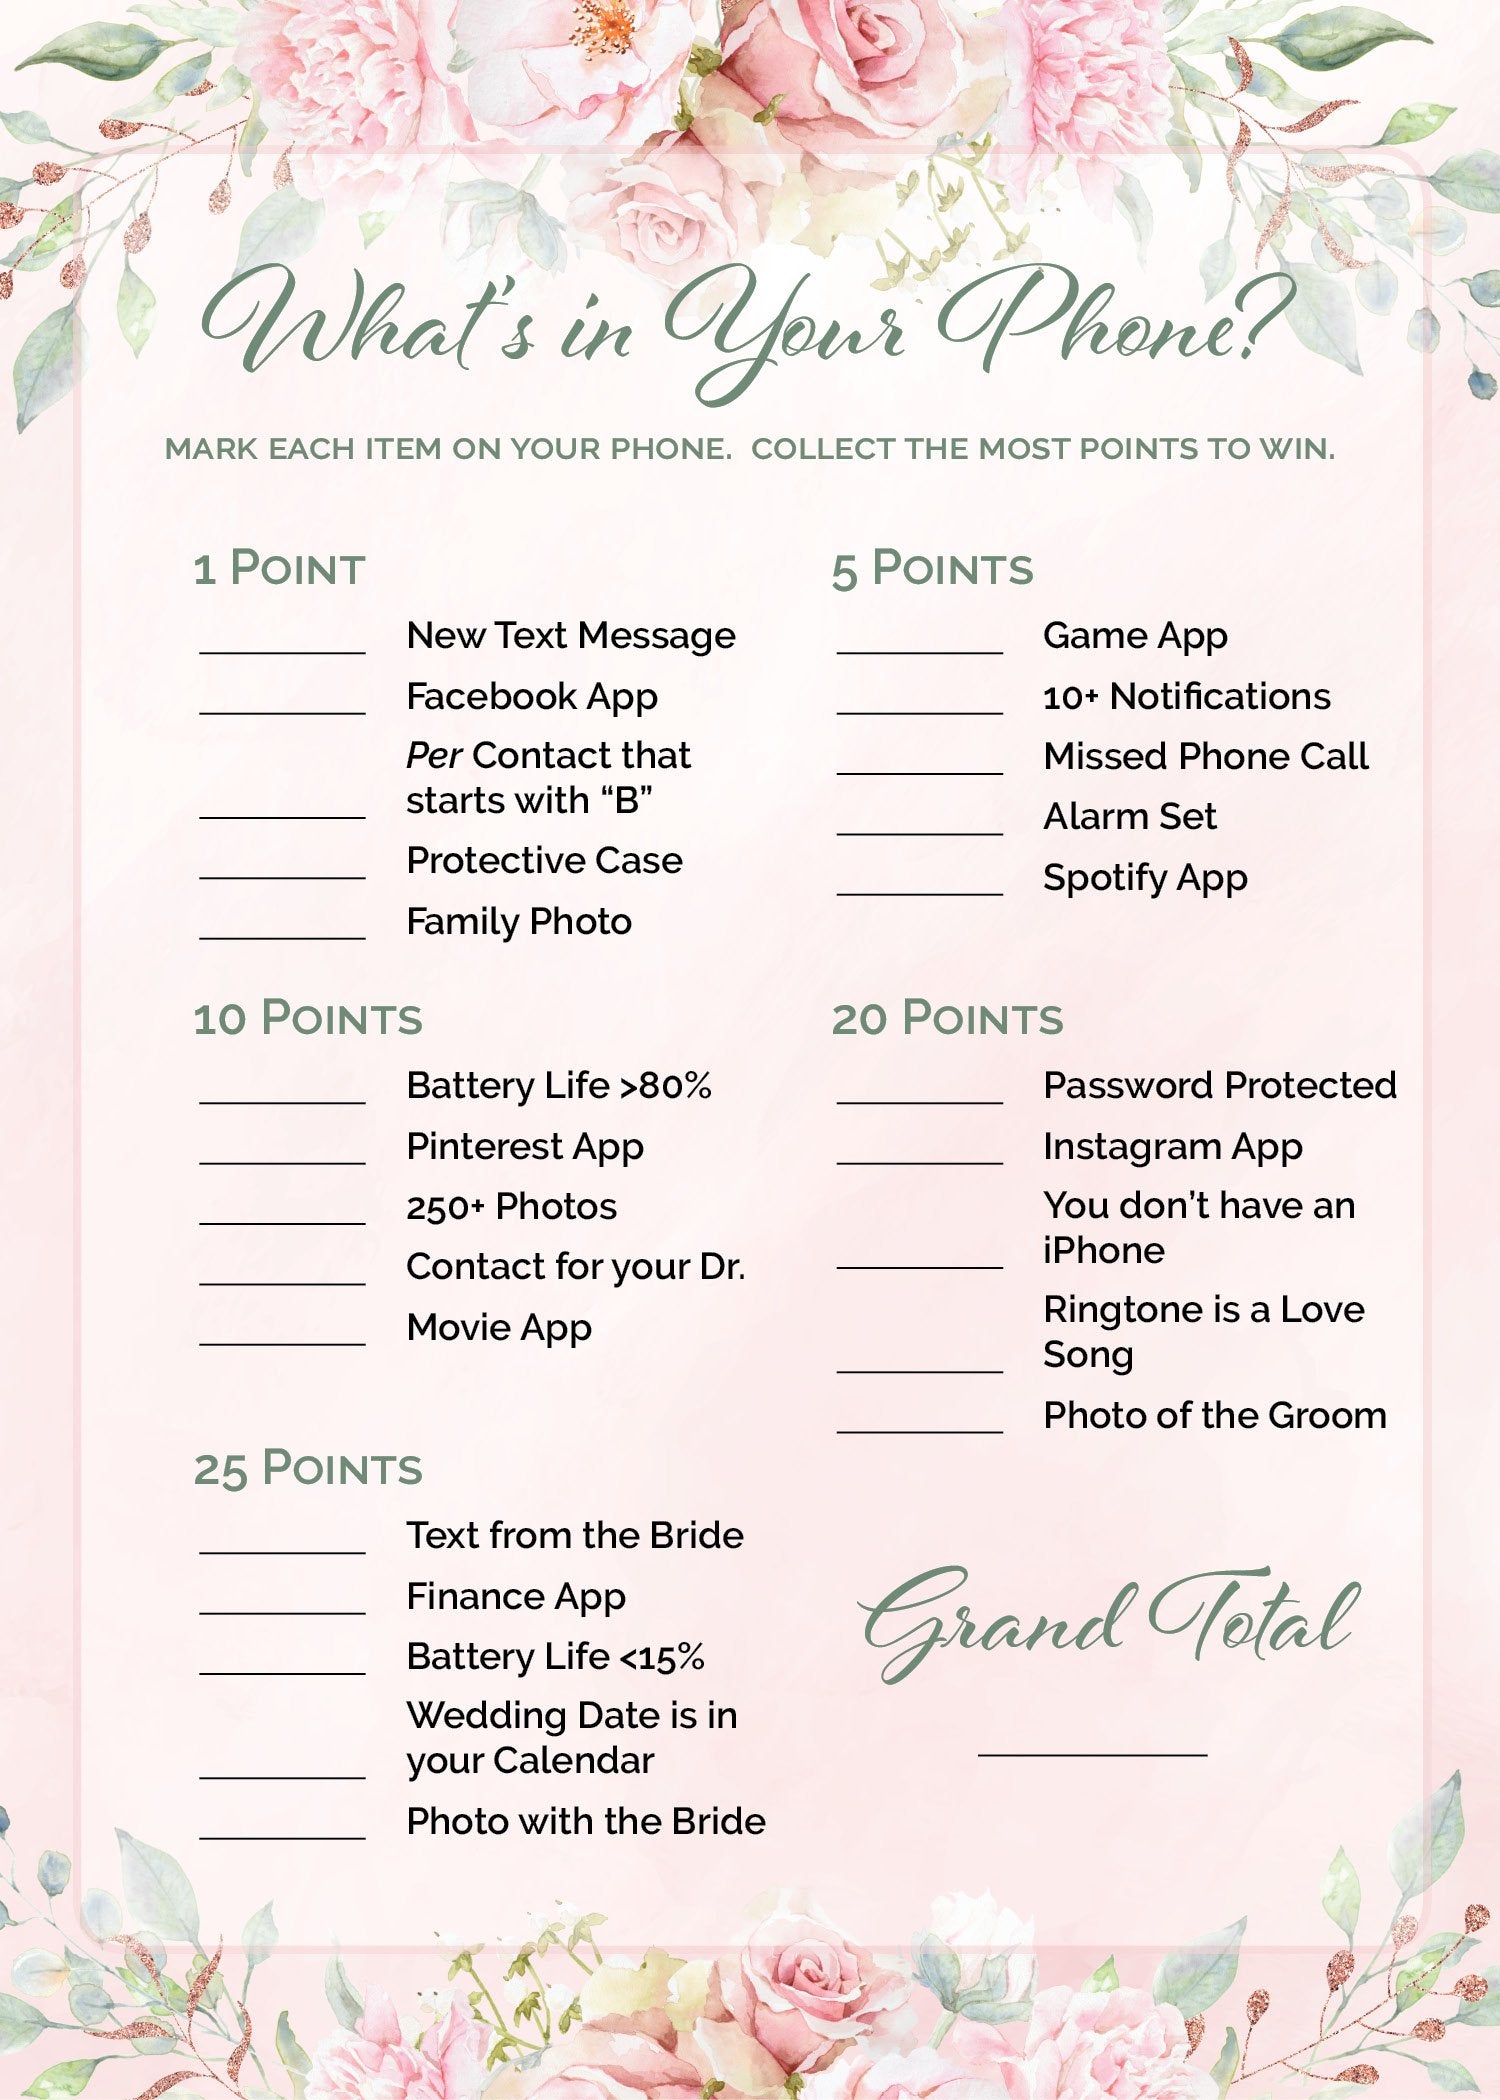 What's In Your Purse? Game Free Printable | Modern MOH